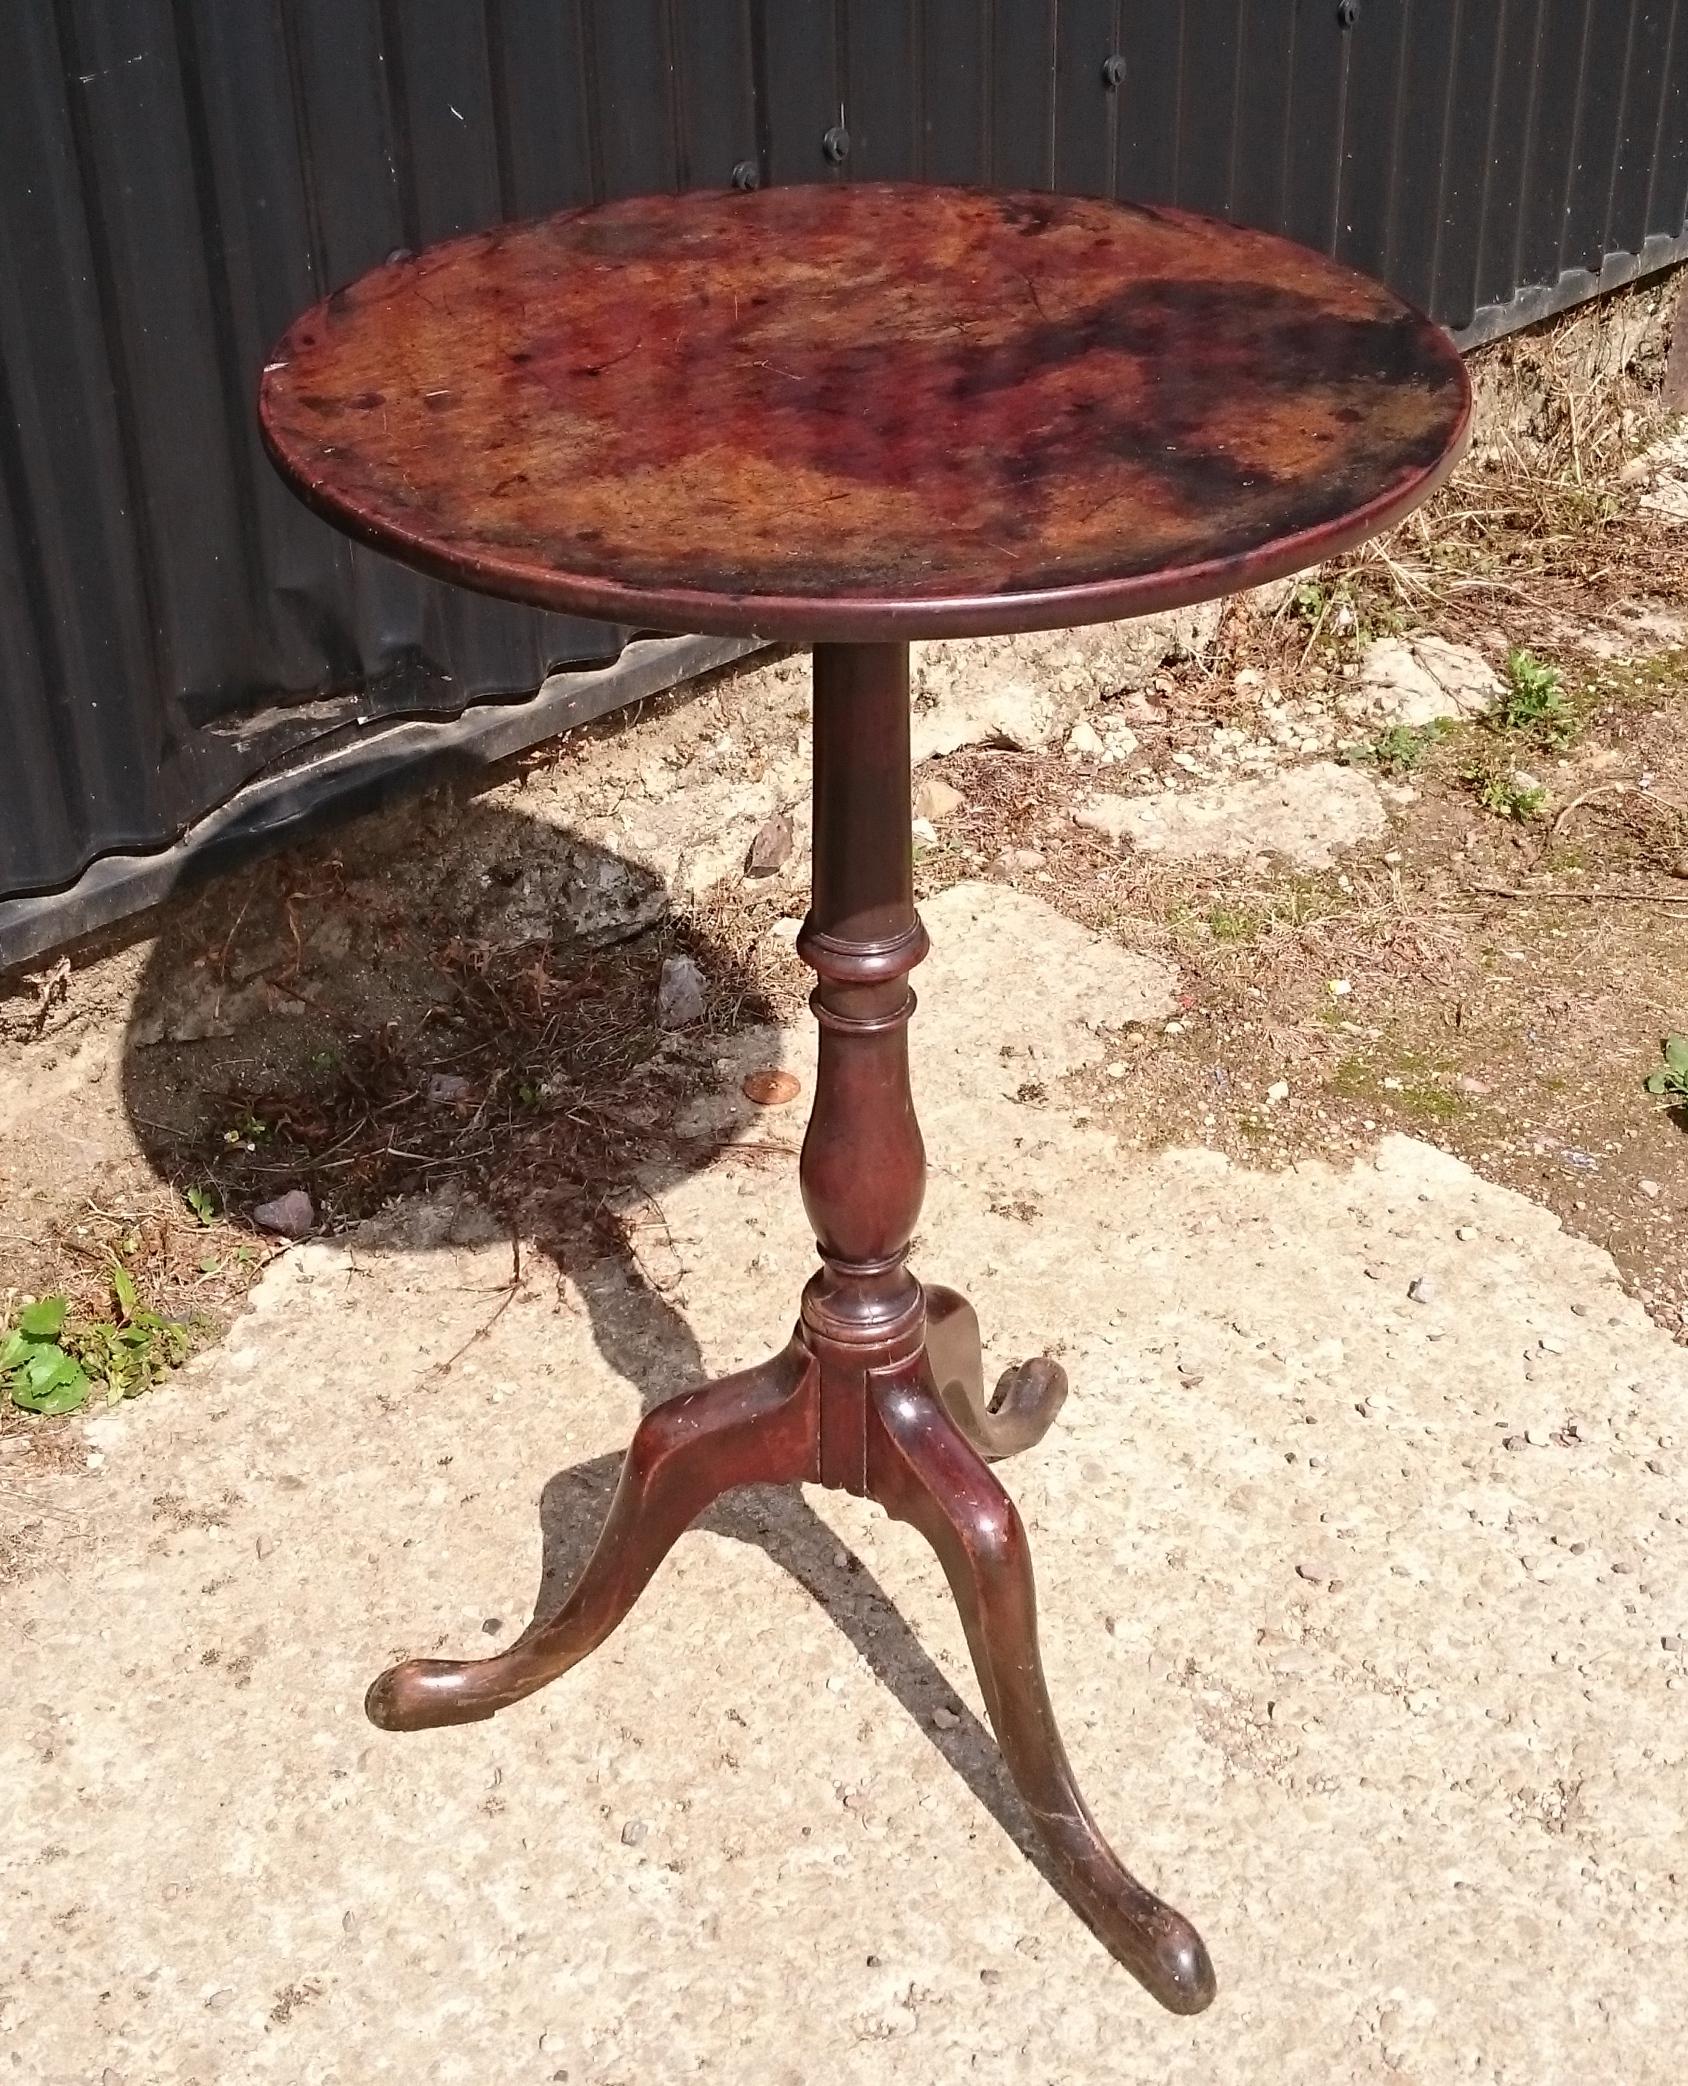 18th century George III period mahogany antique tripod wine table. This table is a wonderful color and has an excellent patina. The base is slender and elegant with outstretched tripod base typical of the late 18th century period.
This table is